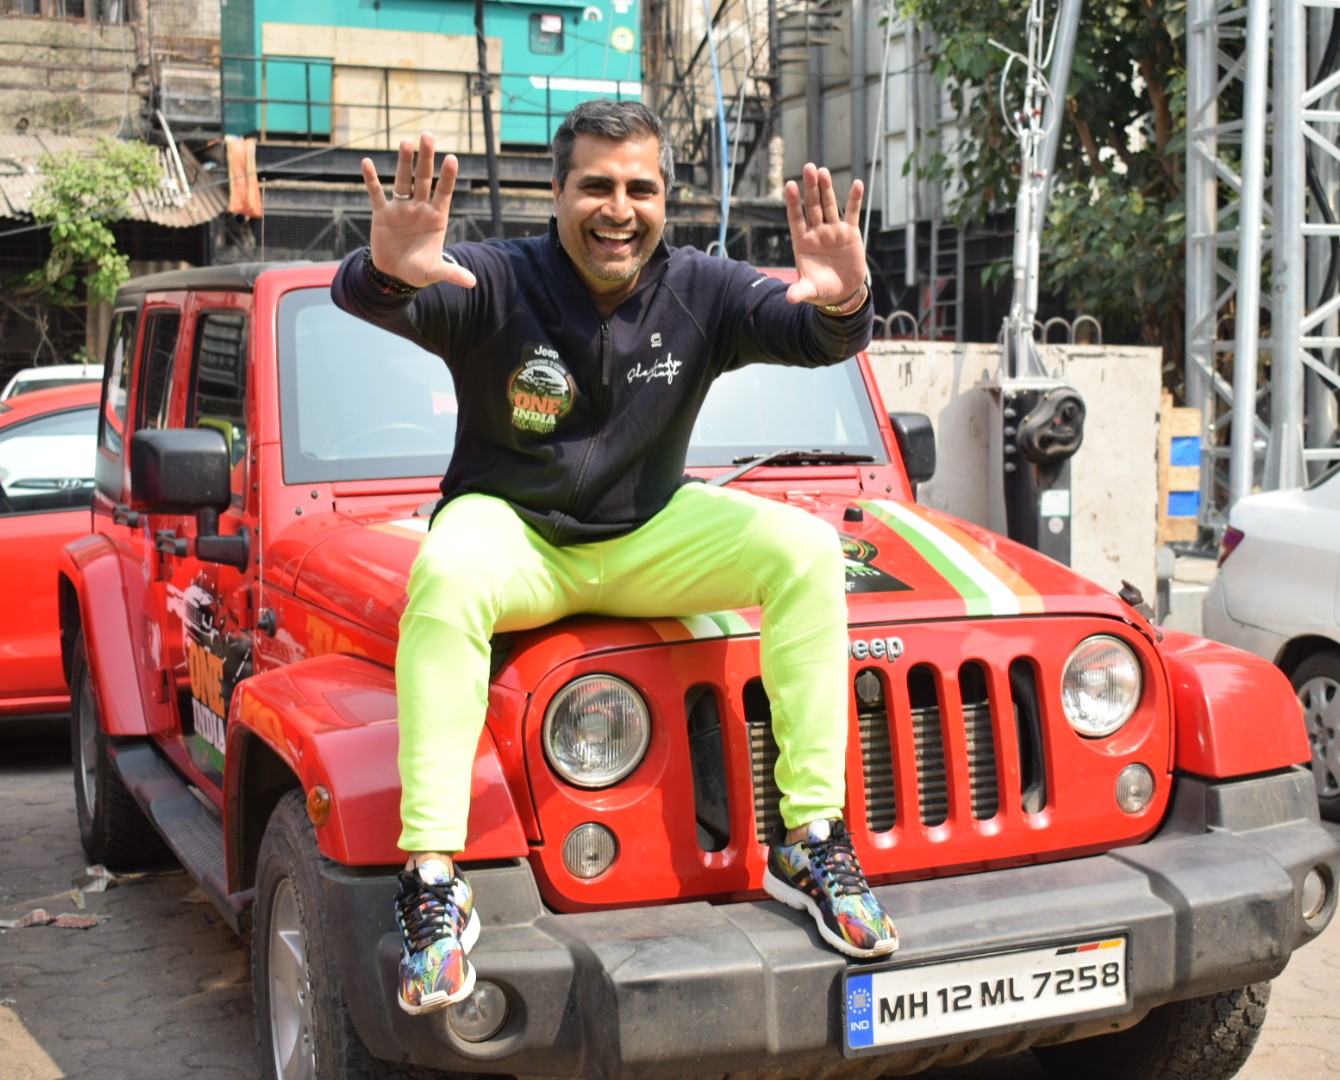 PICS: Shailendra Singh Reaches Delhi For His Nationwide 'One India My India Rally